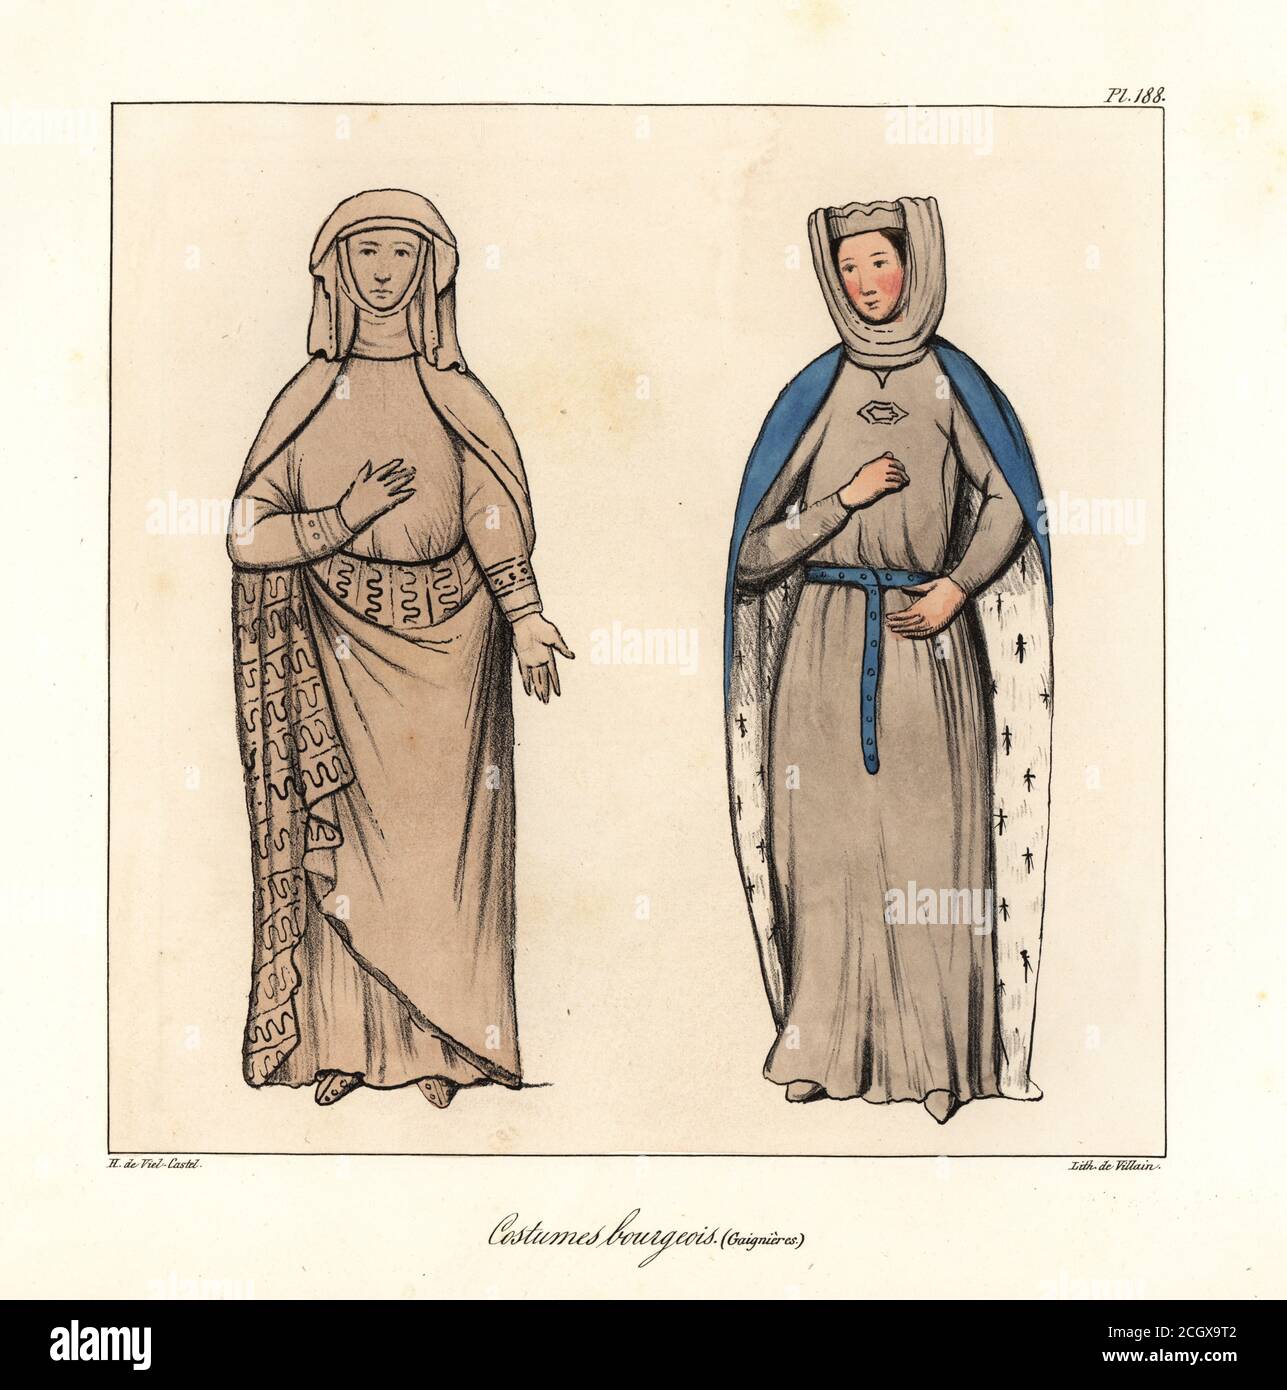 French bourgeois women’s fashions, 13th century. They wear wimples, long robes, cloaks lined with fur and embroidered fabric. Costumes bourgeois, XIIIe siecle (Roger de Gaignieres). Handcoloured lithograph by Villain after an illustration by Horace de Viel-Castel from his Collection des costumes, armes et meubles pour servir à l'histoire de la France (Collection of costumes, weapons and furniture to be used in the history of France), Treuttel & Wurtz, Bossange, 1829. Stock Photo